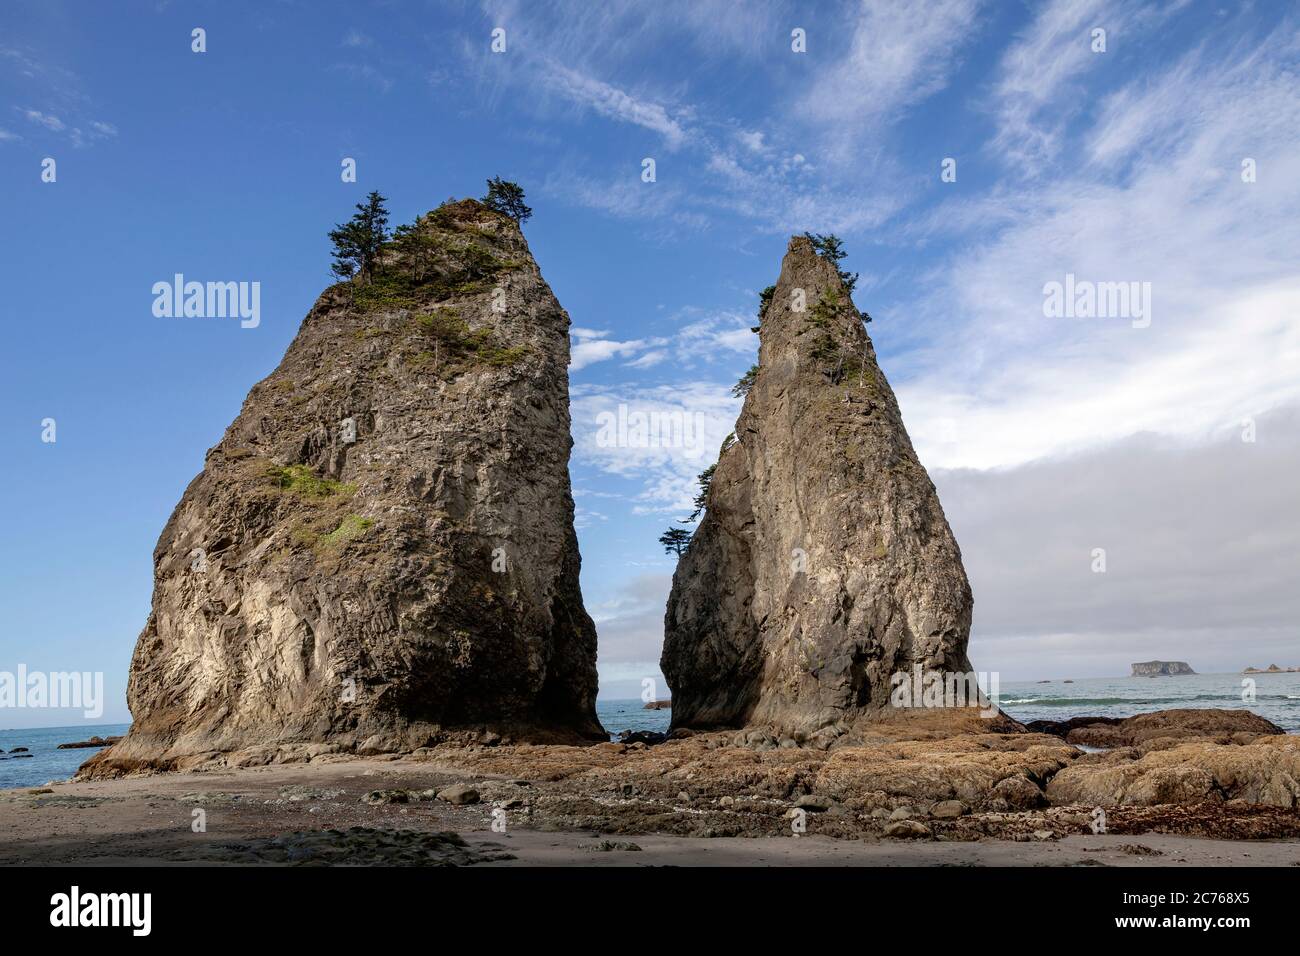 WA17482-00...WASHINGTON - Two sea stacks near Hole-in-the-wall at the north end of Rialto Beach in Olympic National Park. Stock Photo